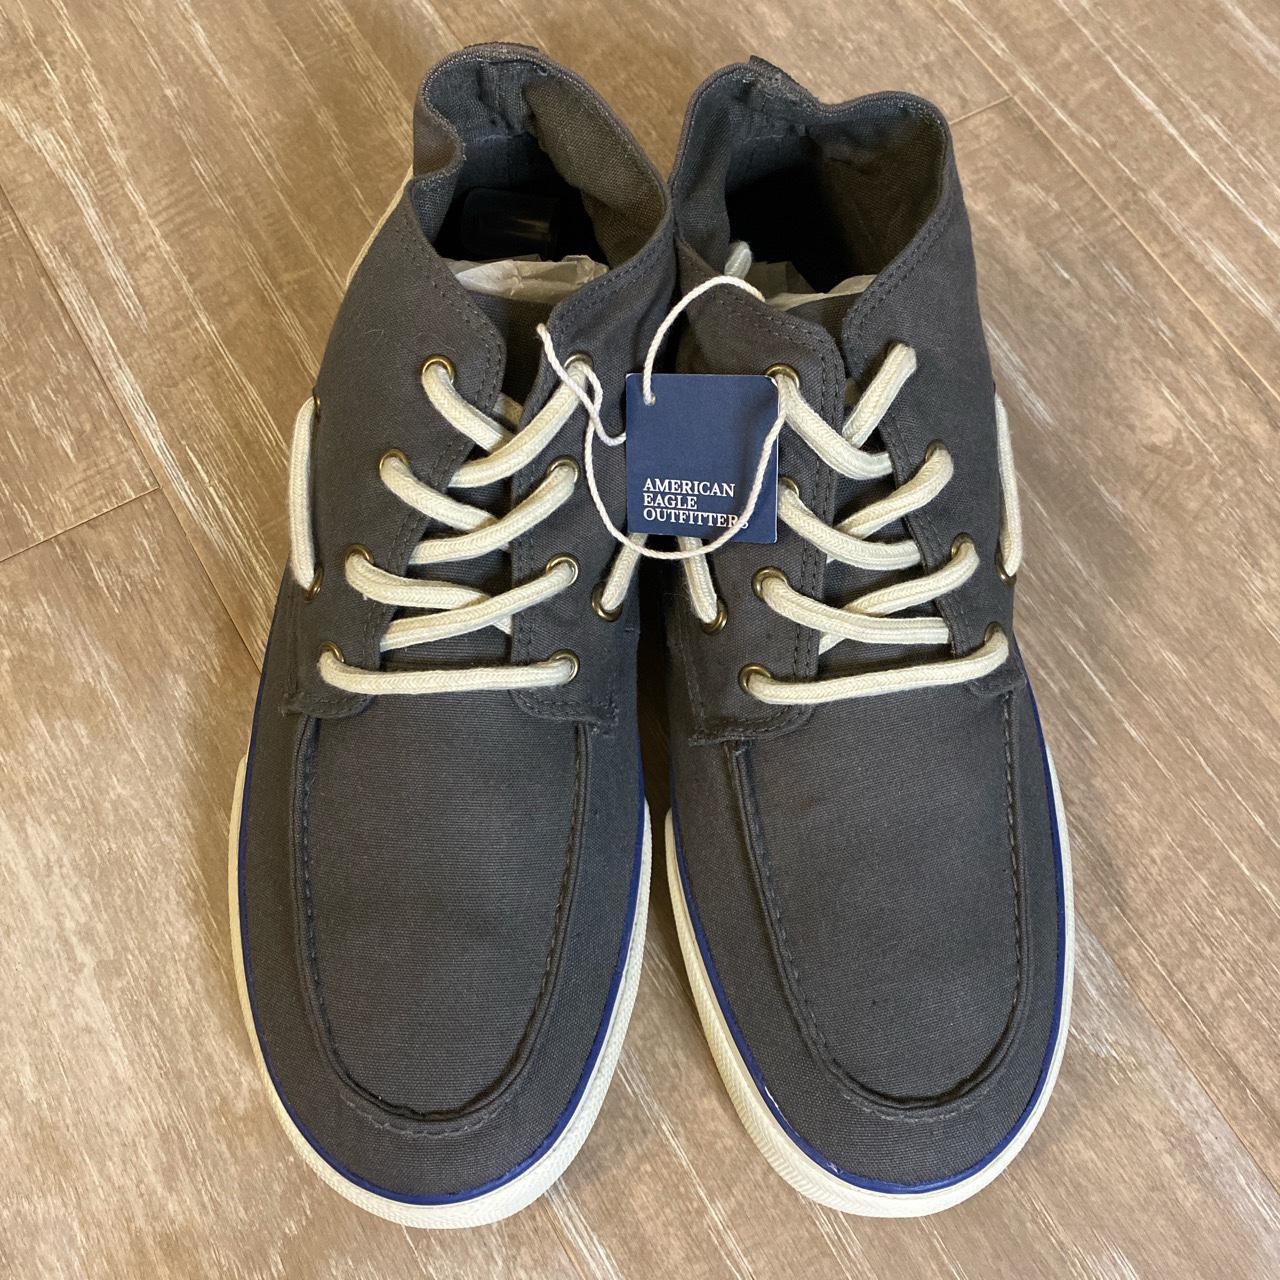 American Eagle Outfitters Men's Boat-shoes | Depop